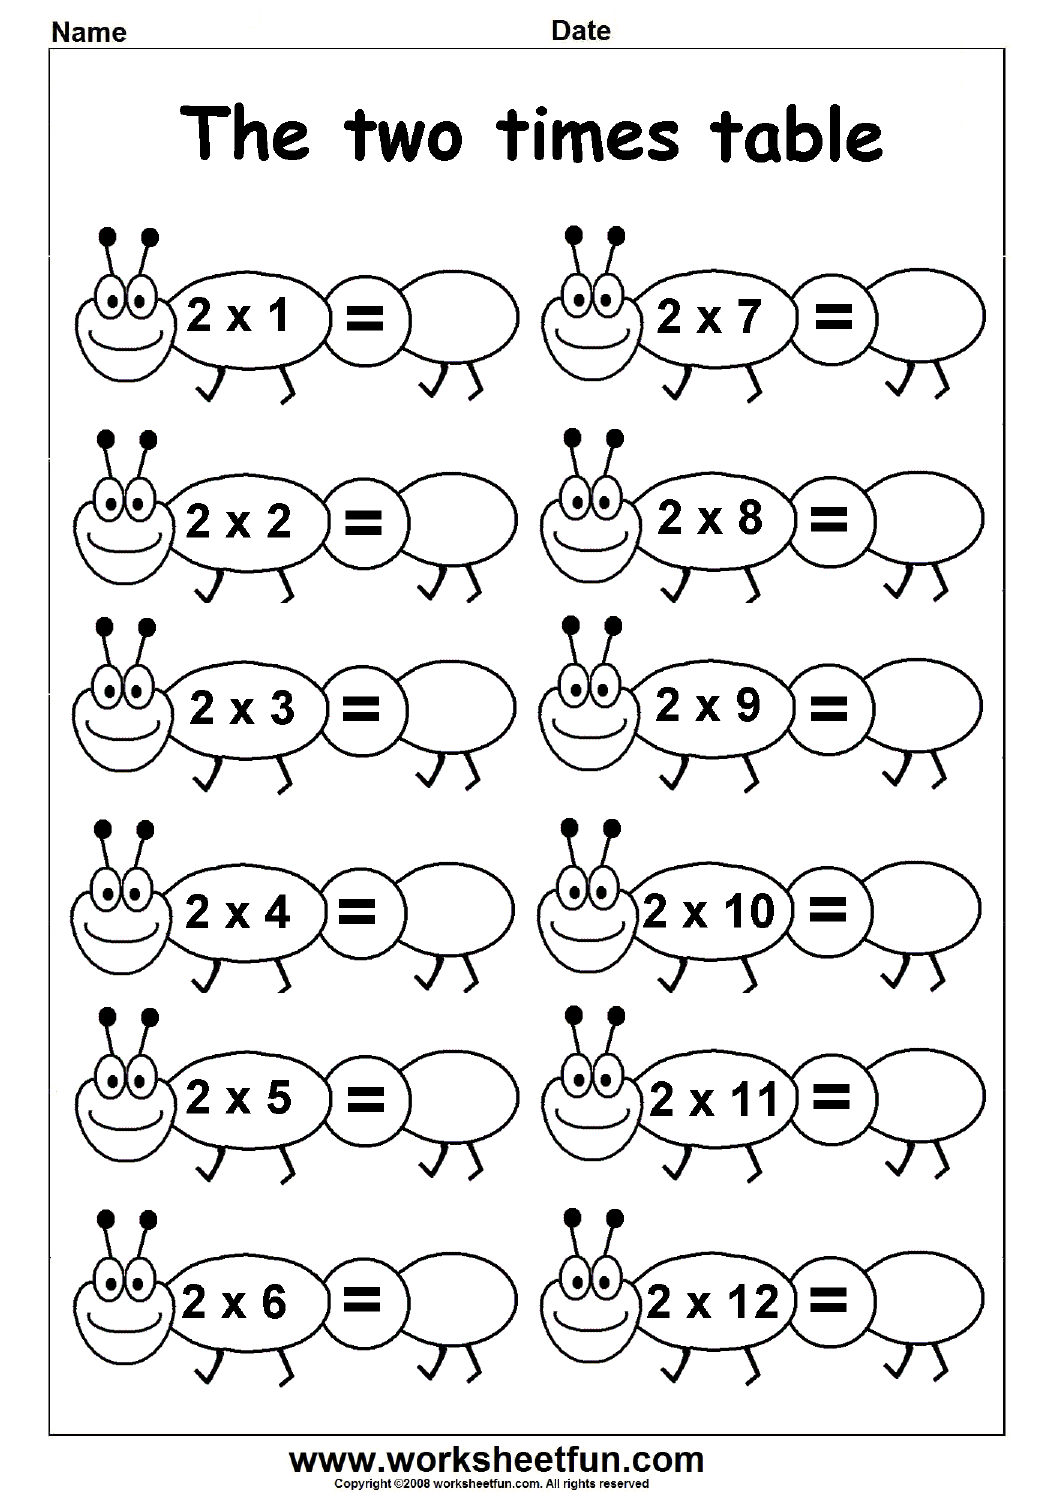 Multiplication Times Tables Worksheets – 21, 21, 21, 21, 21 & 21 Times Within 3 Times Table Worksheet